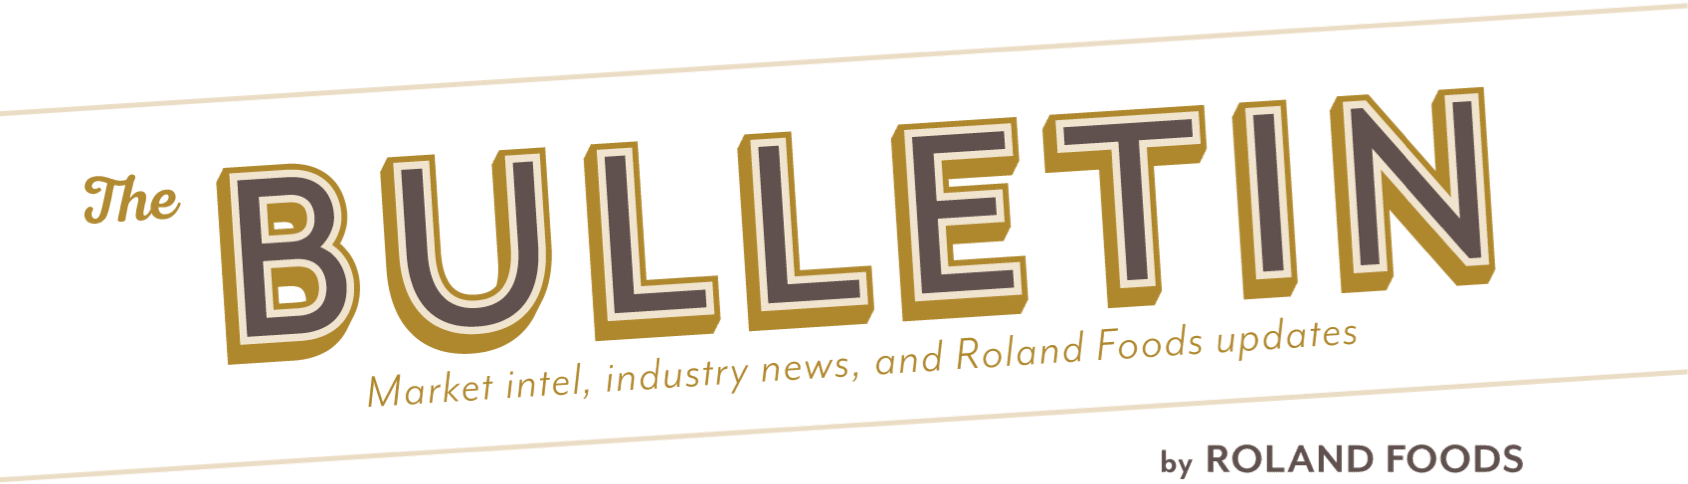 The Bulletin: Seasonally inspired culinary newsletter by Roland Foods